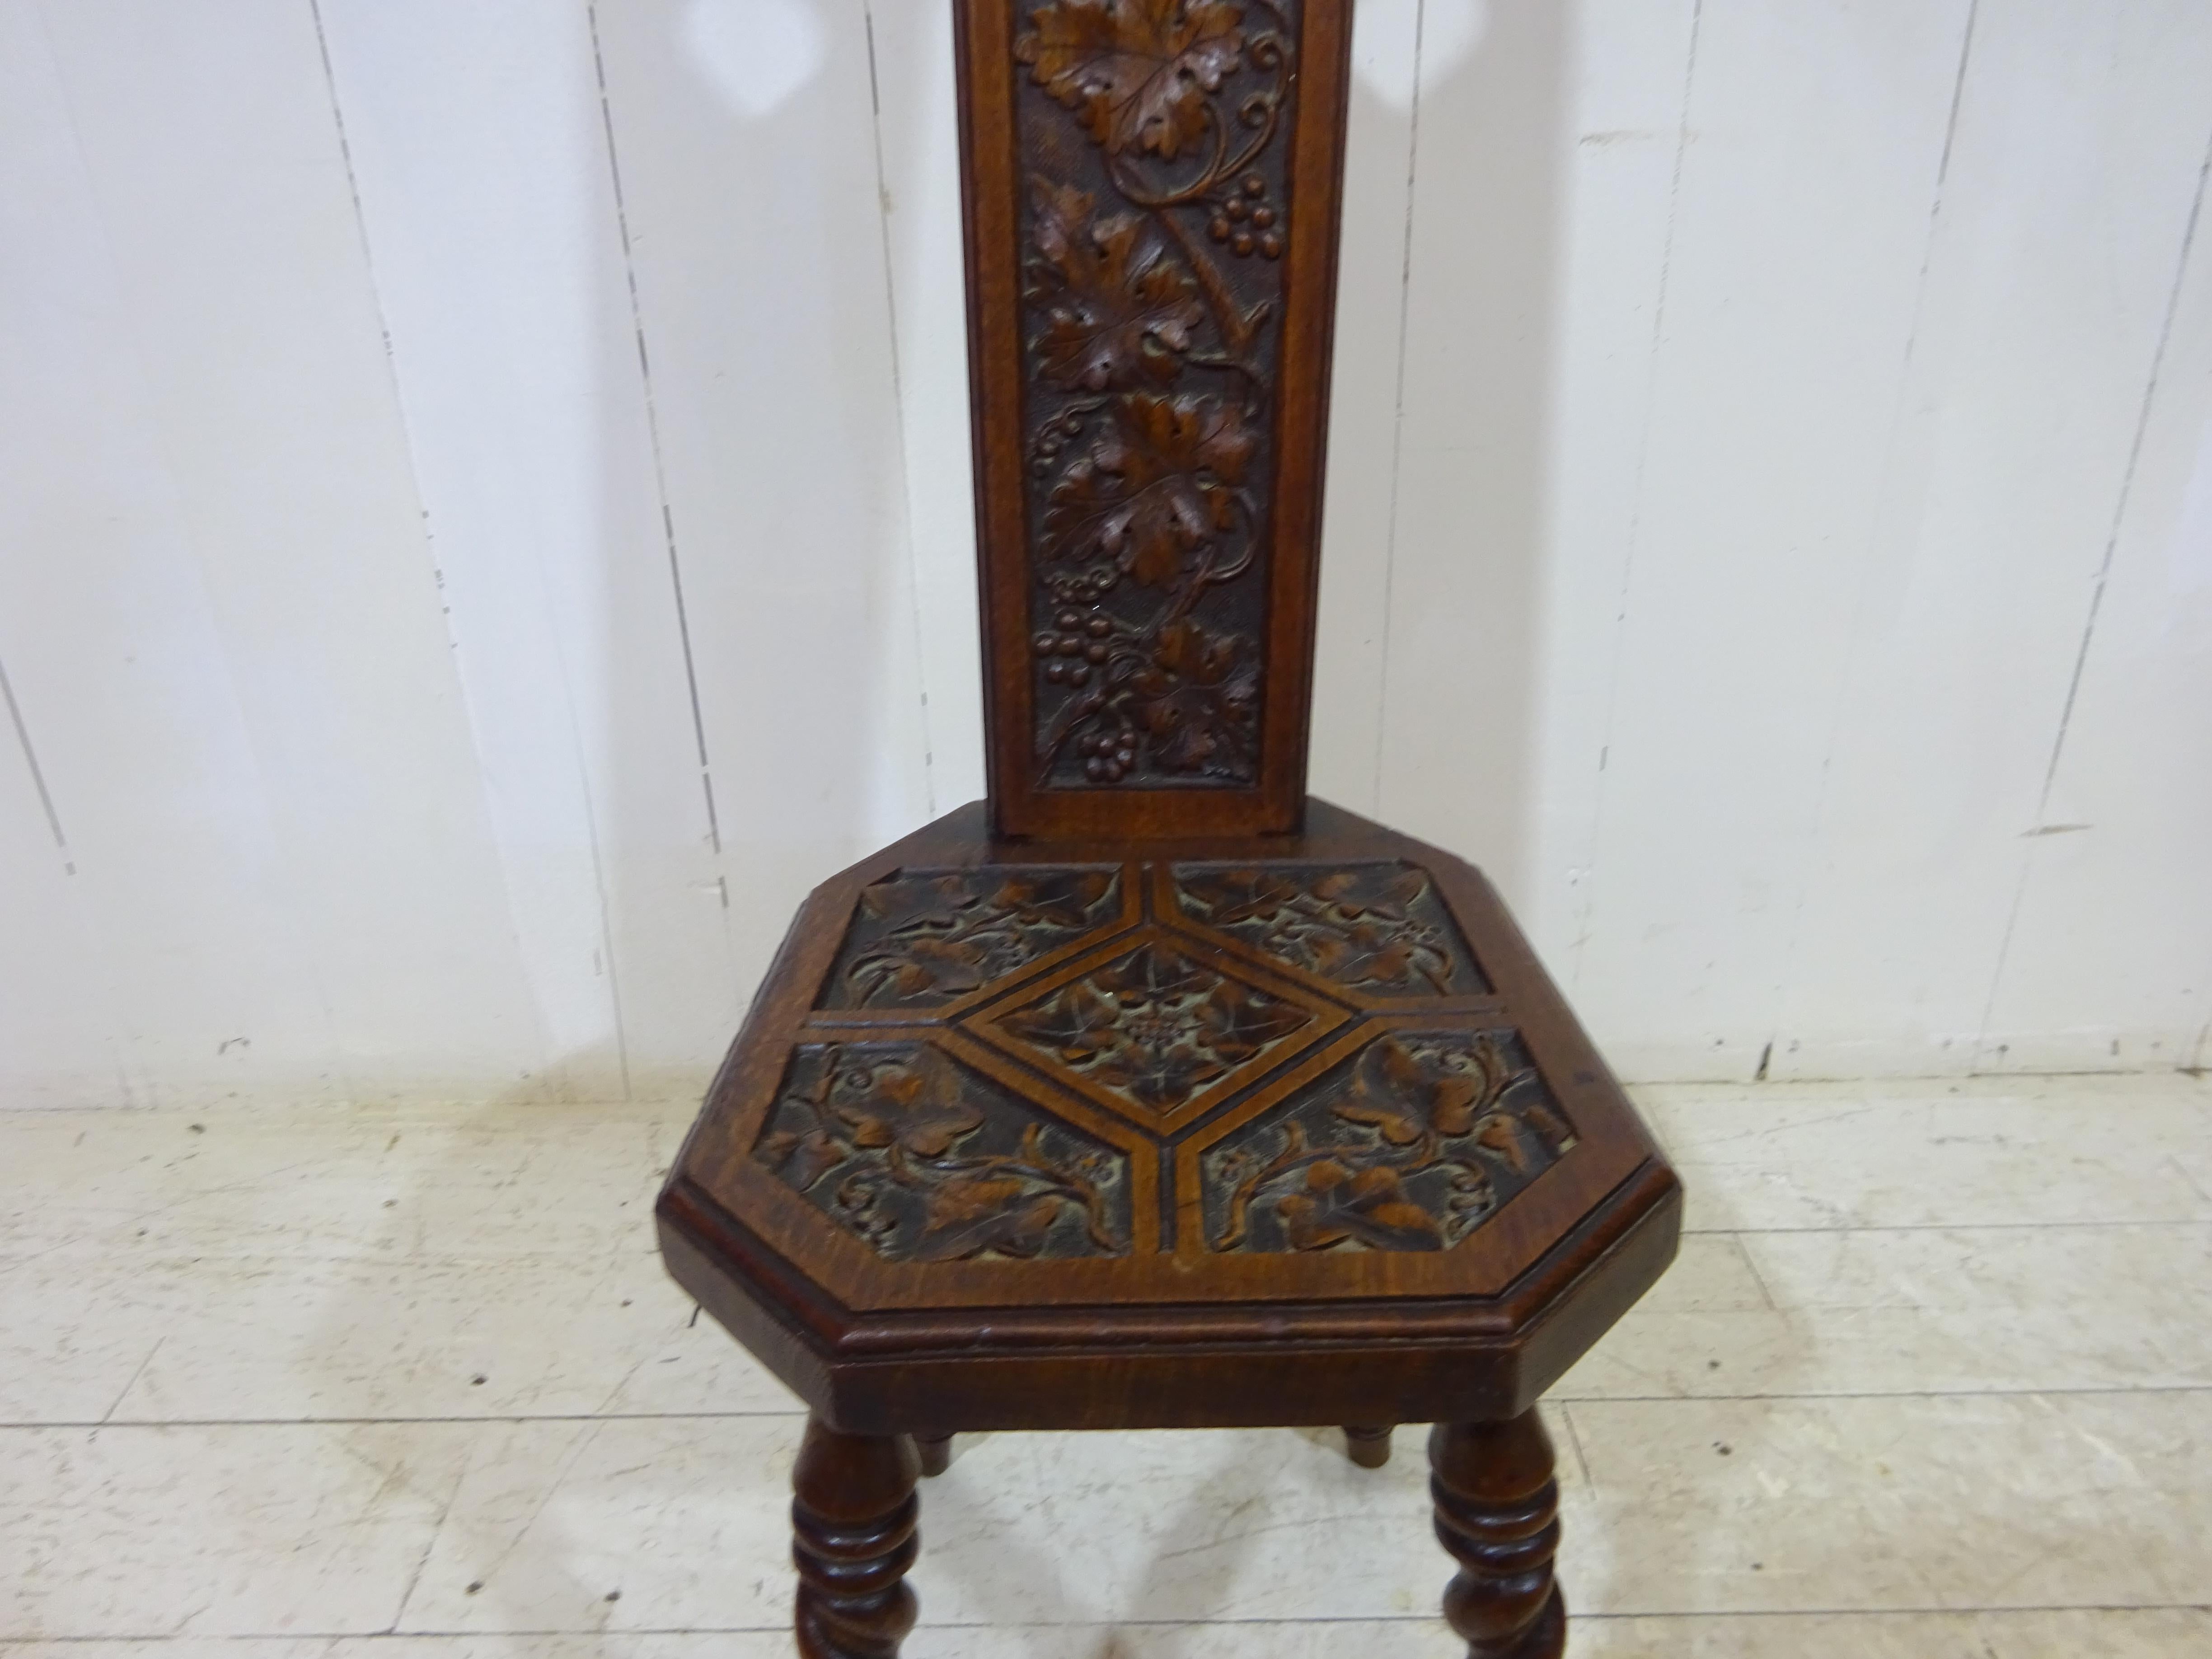 Introducing our exquisite Victorian Hand Carved Hall Chair - a true masterpiece of Victorian craftsmanship. Expertly constructed from solid oak, this stunning chair features a beautifully detailed barley twist design, with a heart shaped engraved